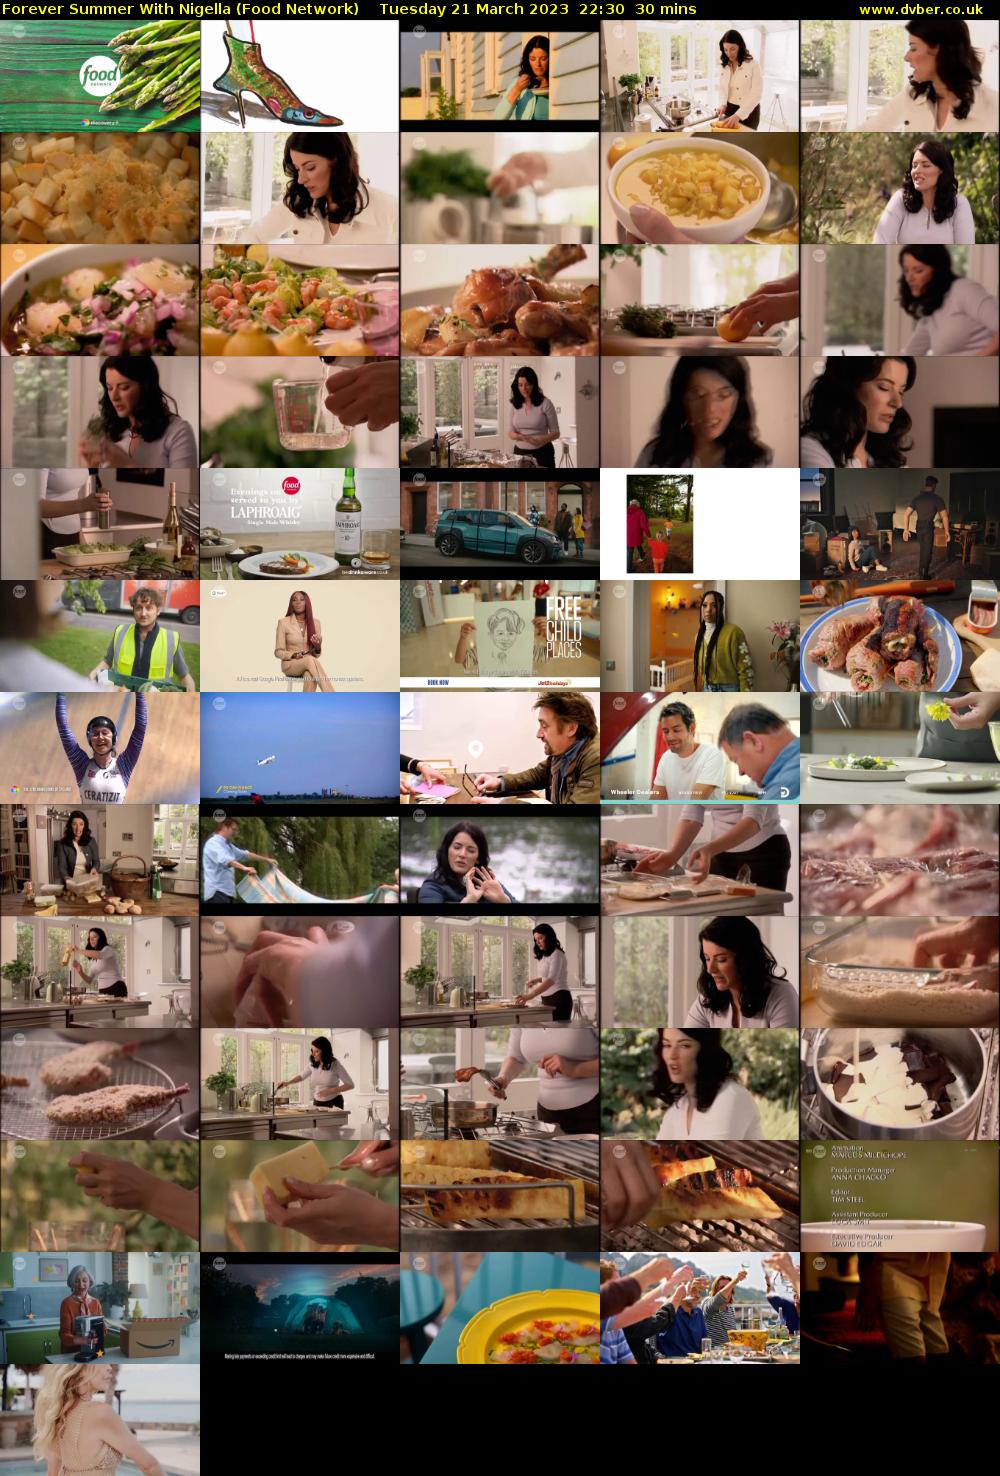 Forever Summer with Nigella (Food Network) Tuesday 21 March 2023 22:30 - 23:00